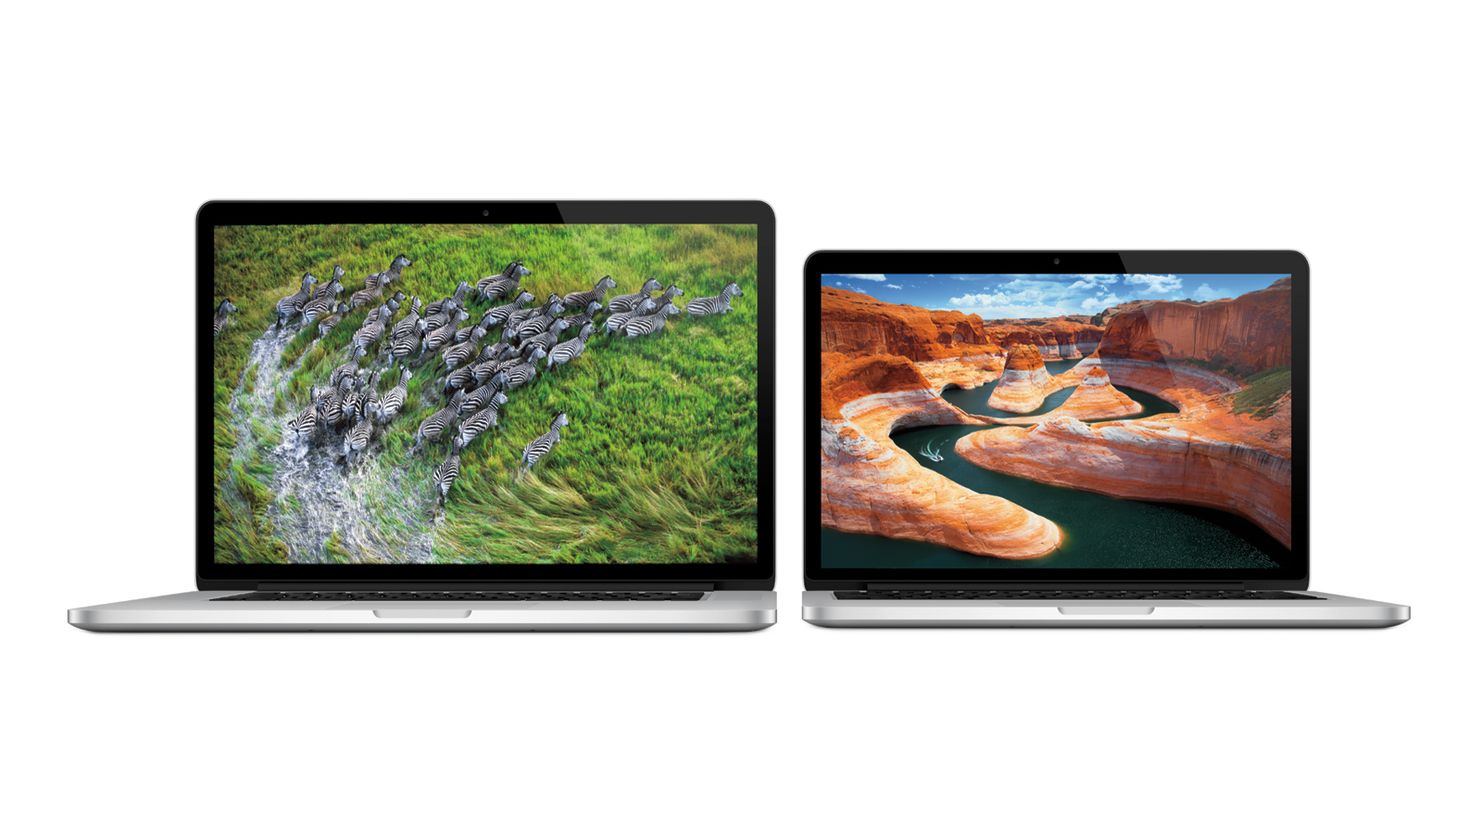 Apple says it's cutting the price of its 13-inch MacBook Pro with Retina Display by $200-$300, depending on storage.